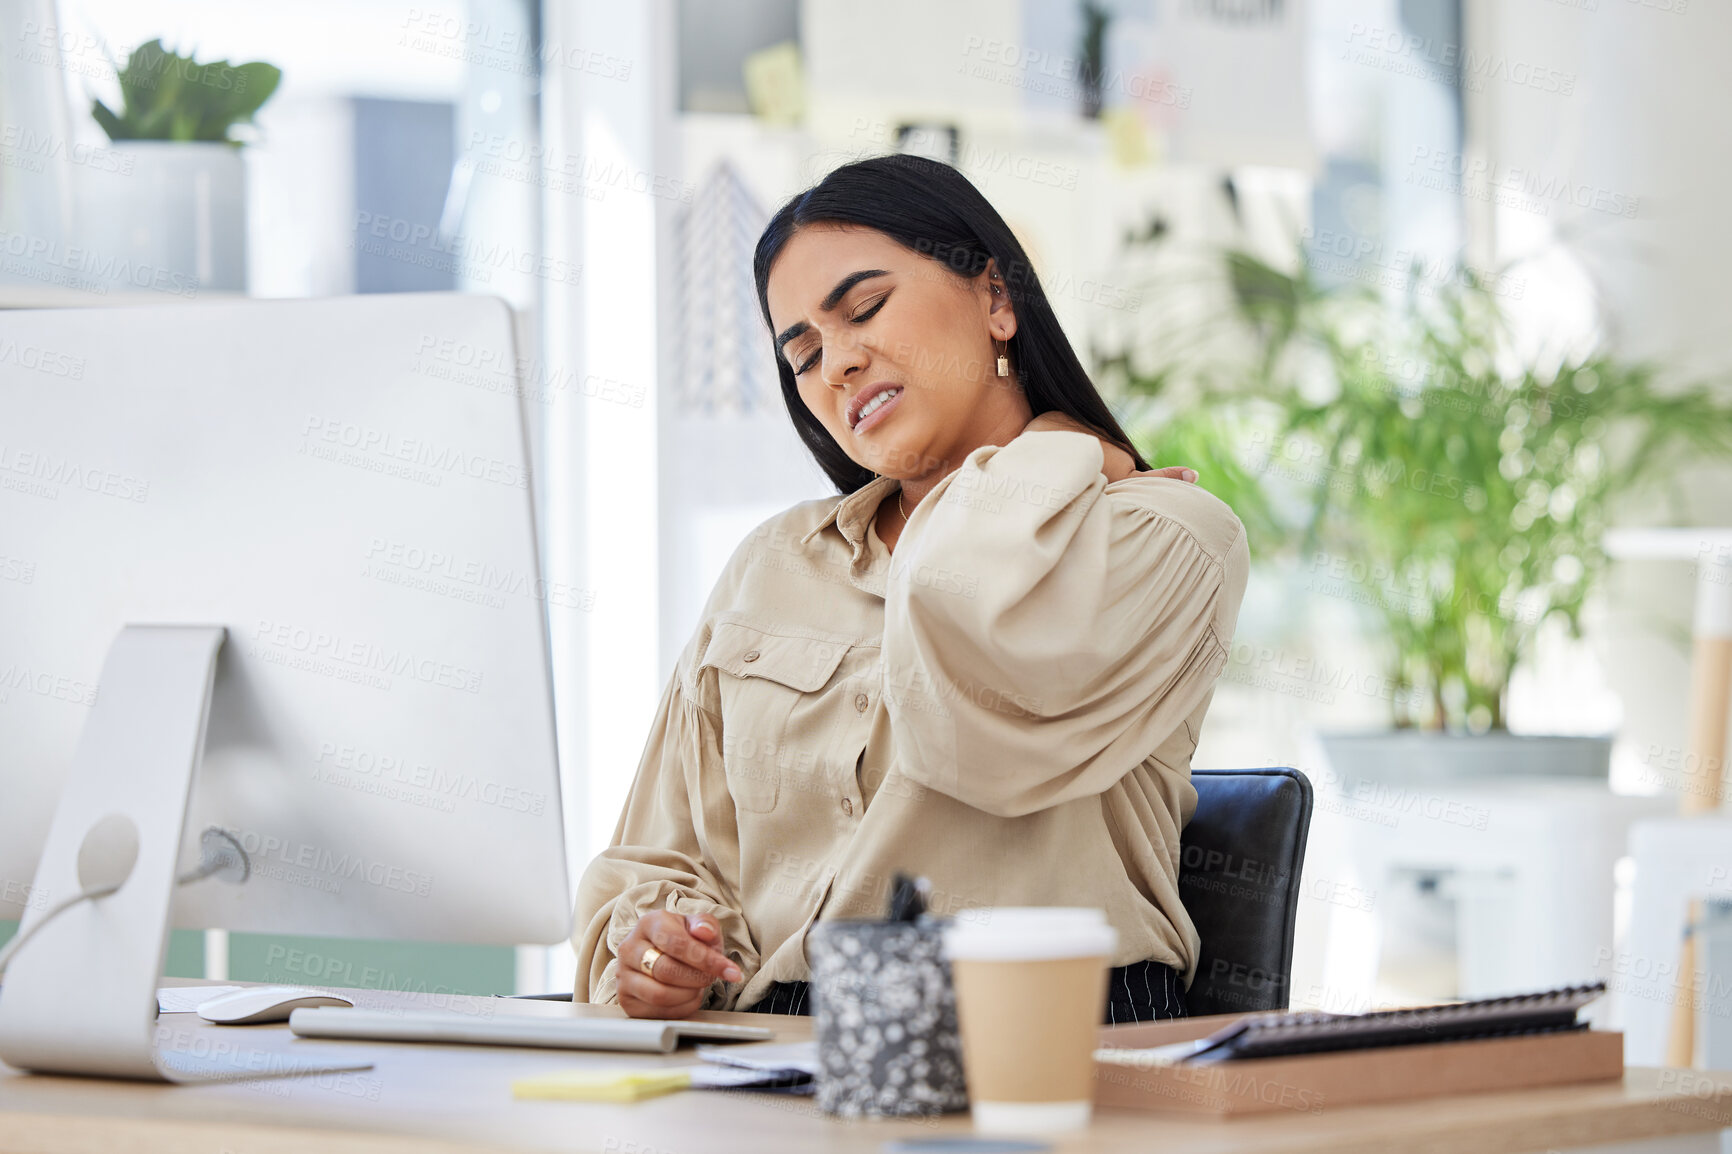 Buy stock photo Tired, office or woman with neck pain injury, burnout or bad ache at a business or company desk table. Posture problems, muscle tension or injured female worker frustrated or stressed by emergency